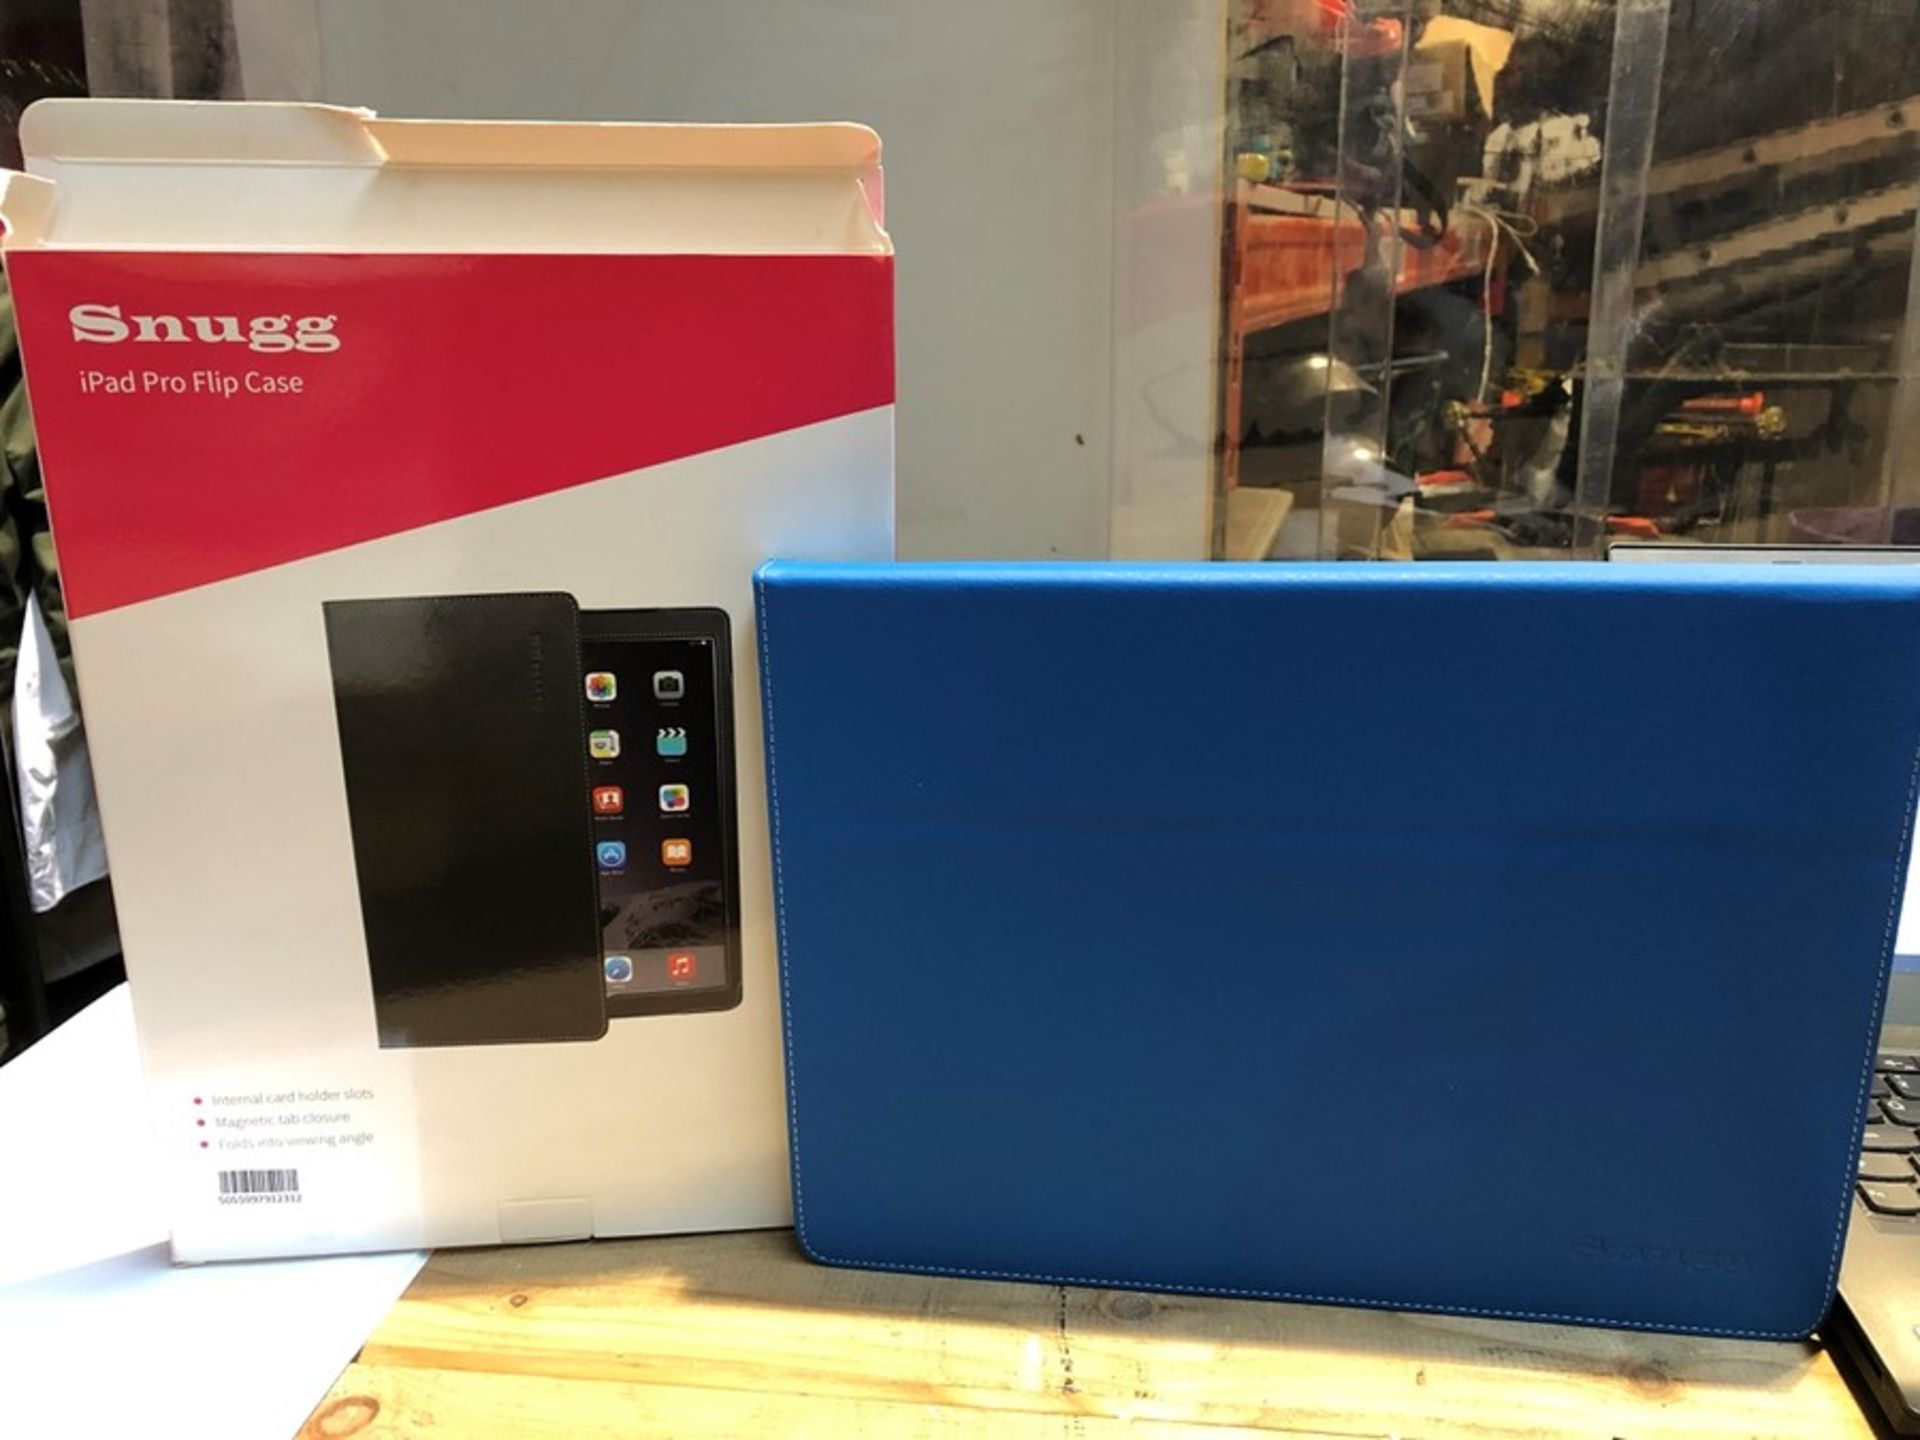 1 LOT TO CONTAIN 4 BOXED SNUGG IPAD PRO FLIP CASES 12.9 INCH IN BLUE / RRP £99.96 (PUBLIC VIEWING